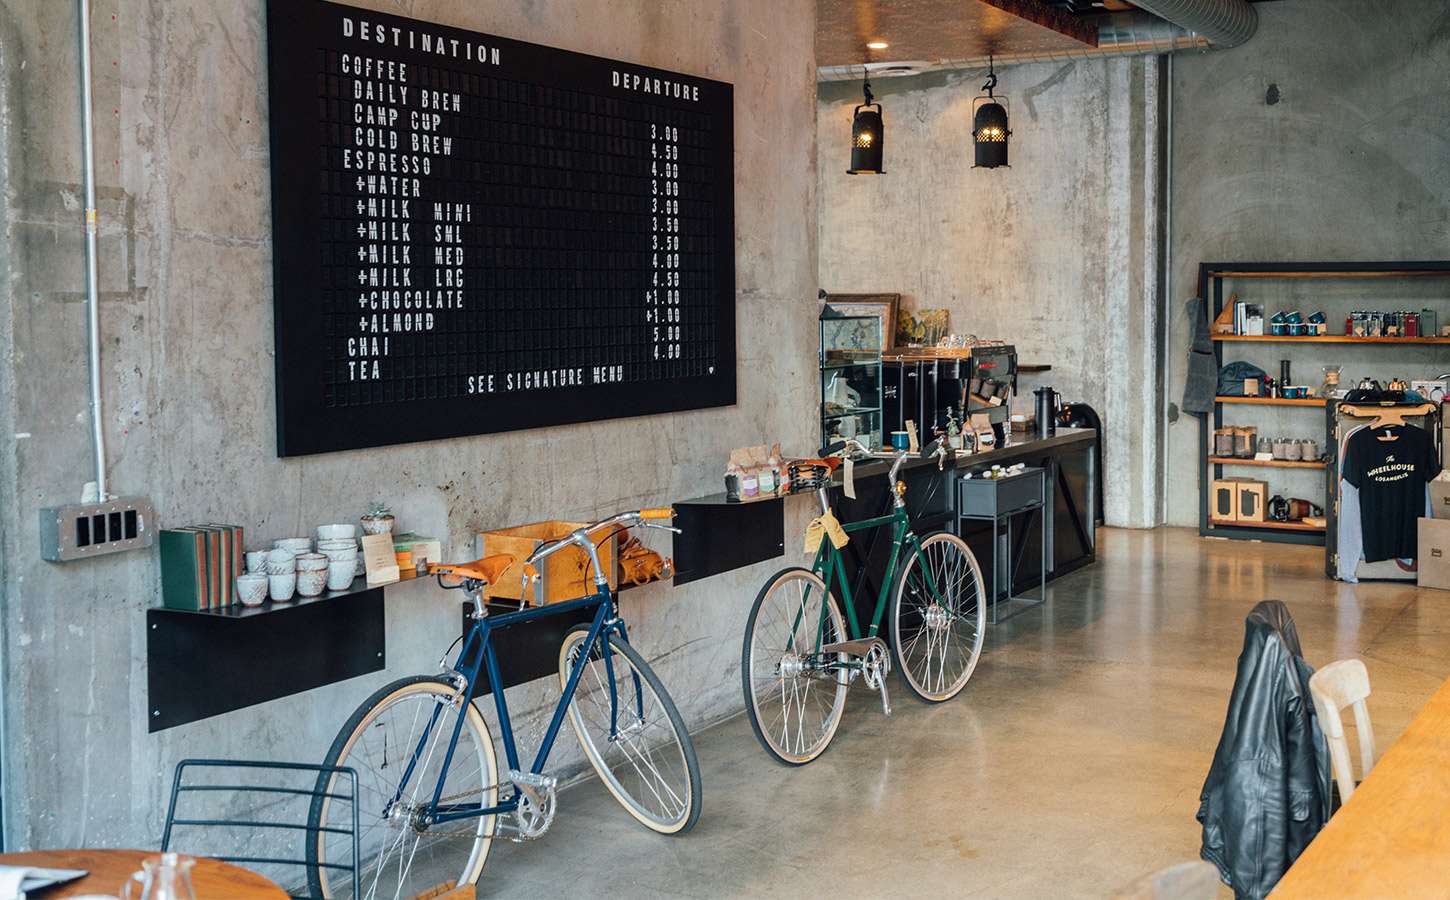 Coffee shop interior with a menu on the wall along with bicycles and mugs.